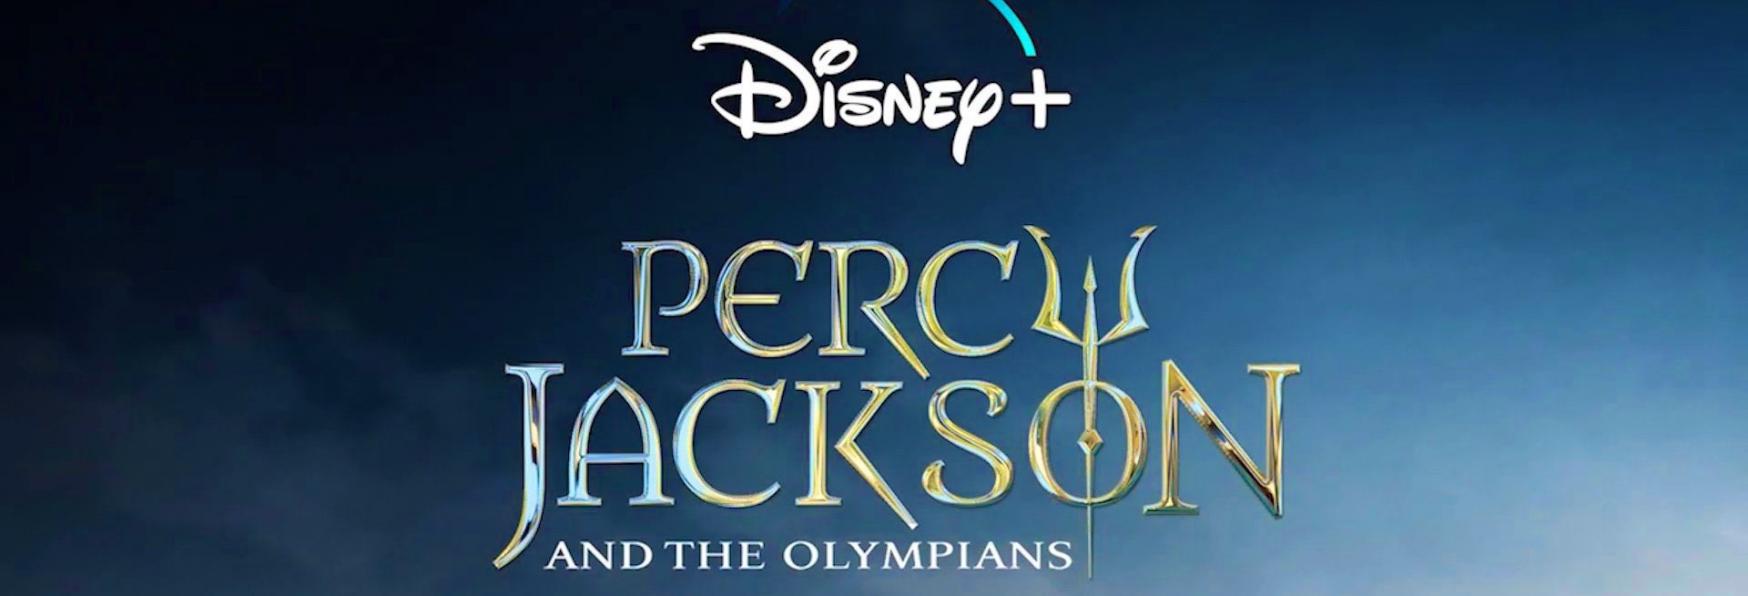 Percy Jackson and the Olympians: Filming of the Disney+ TV series has finished